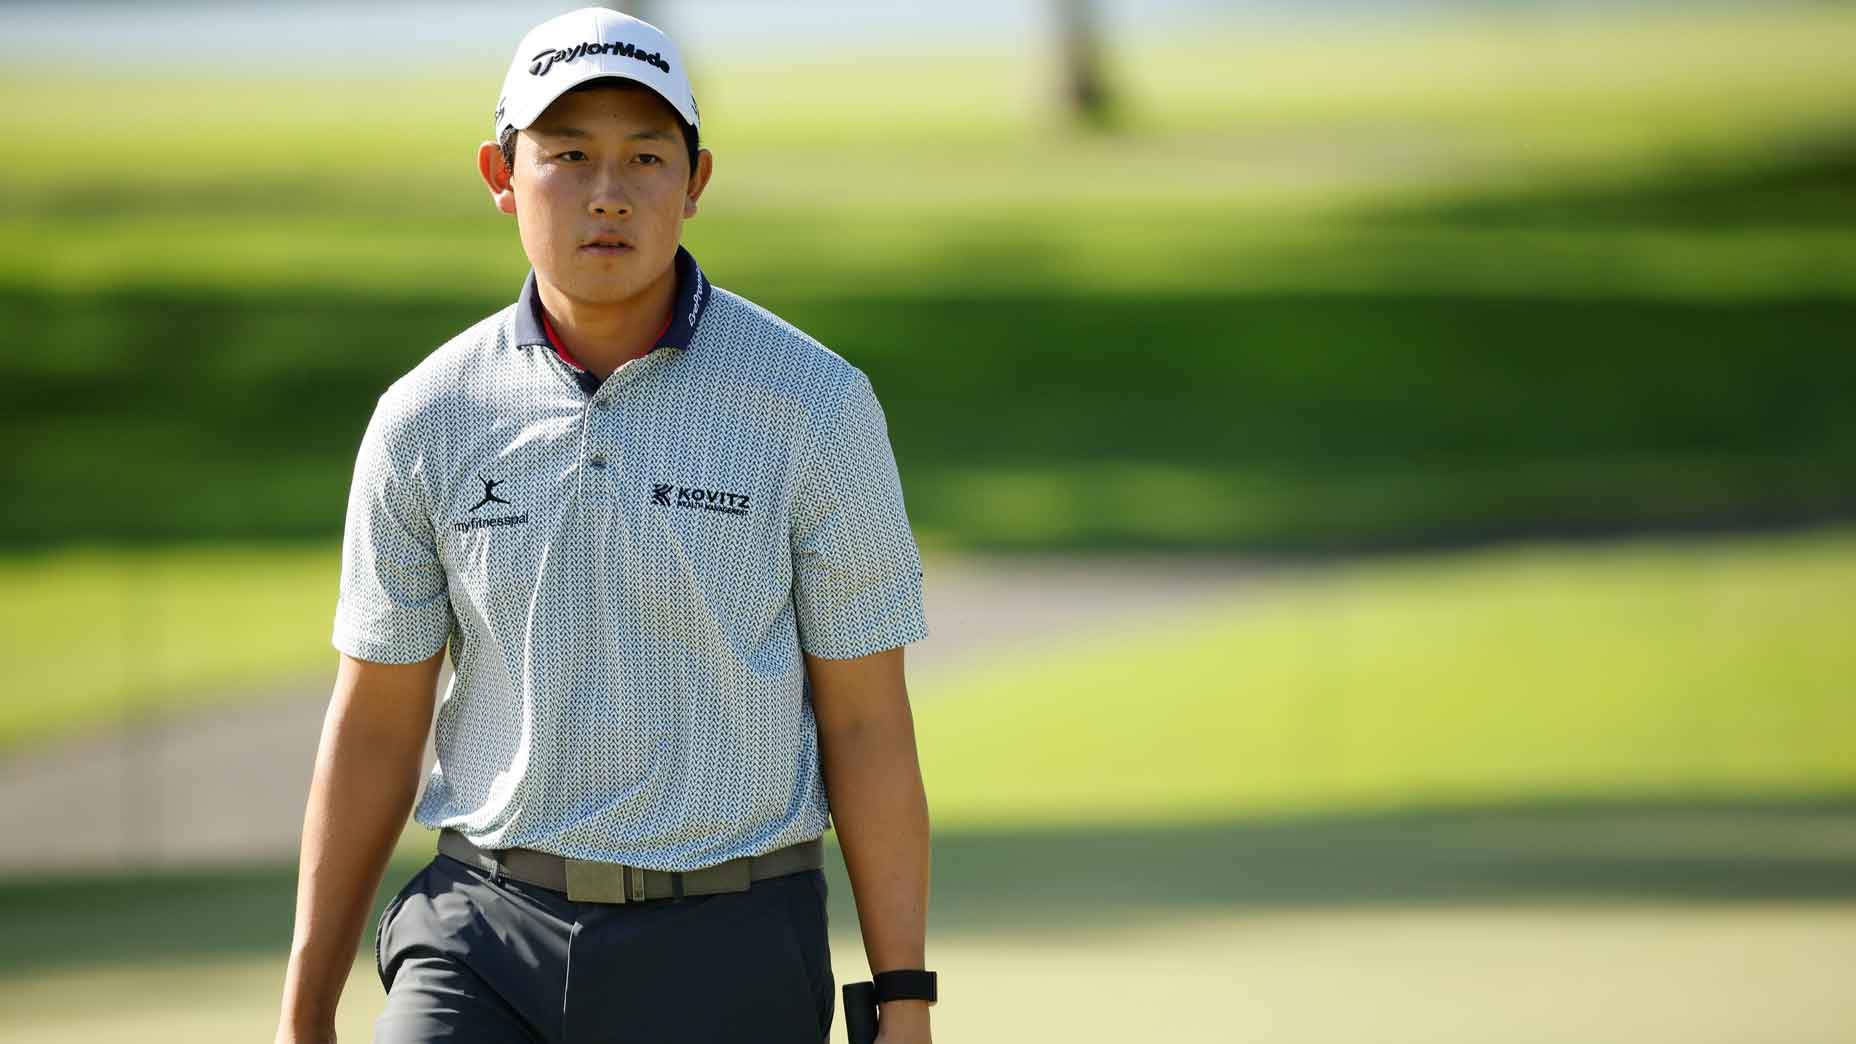 The ideal diet for a golfer, according to a PGA Tour rookie